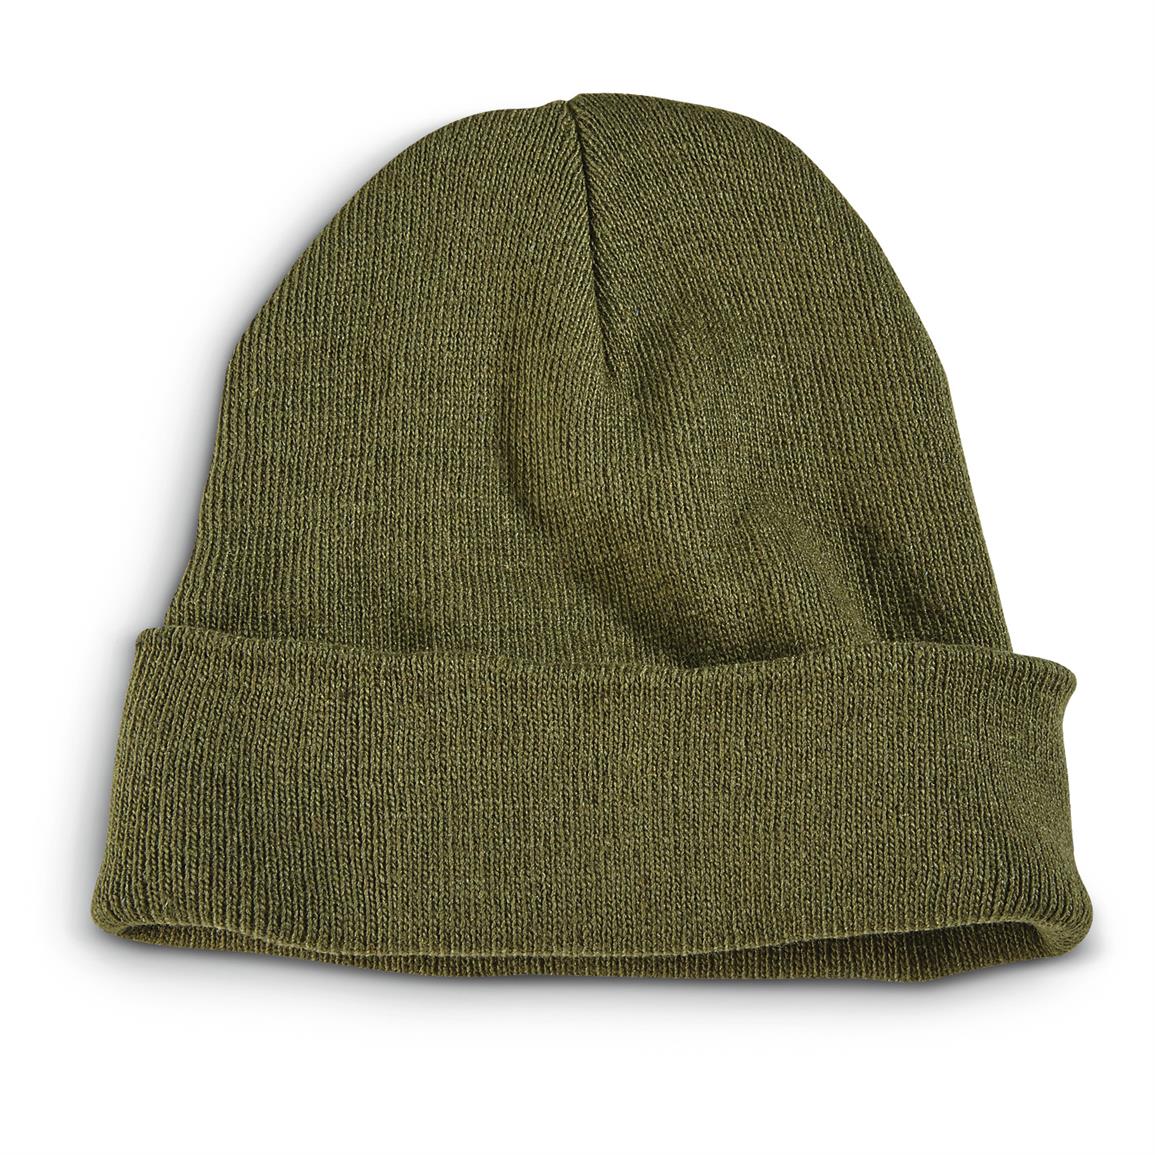 Military-Style Watch Caps, 6 Pack, Olive Drab